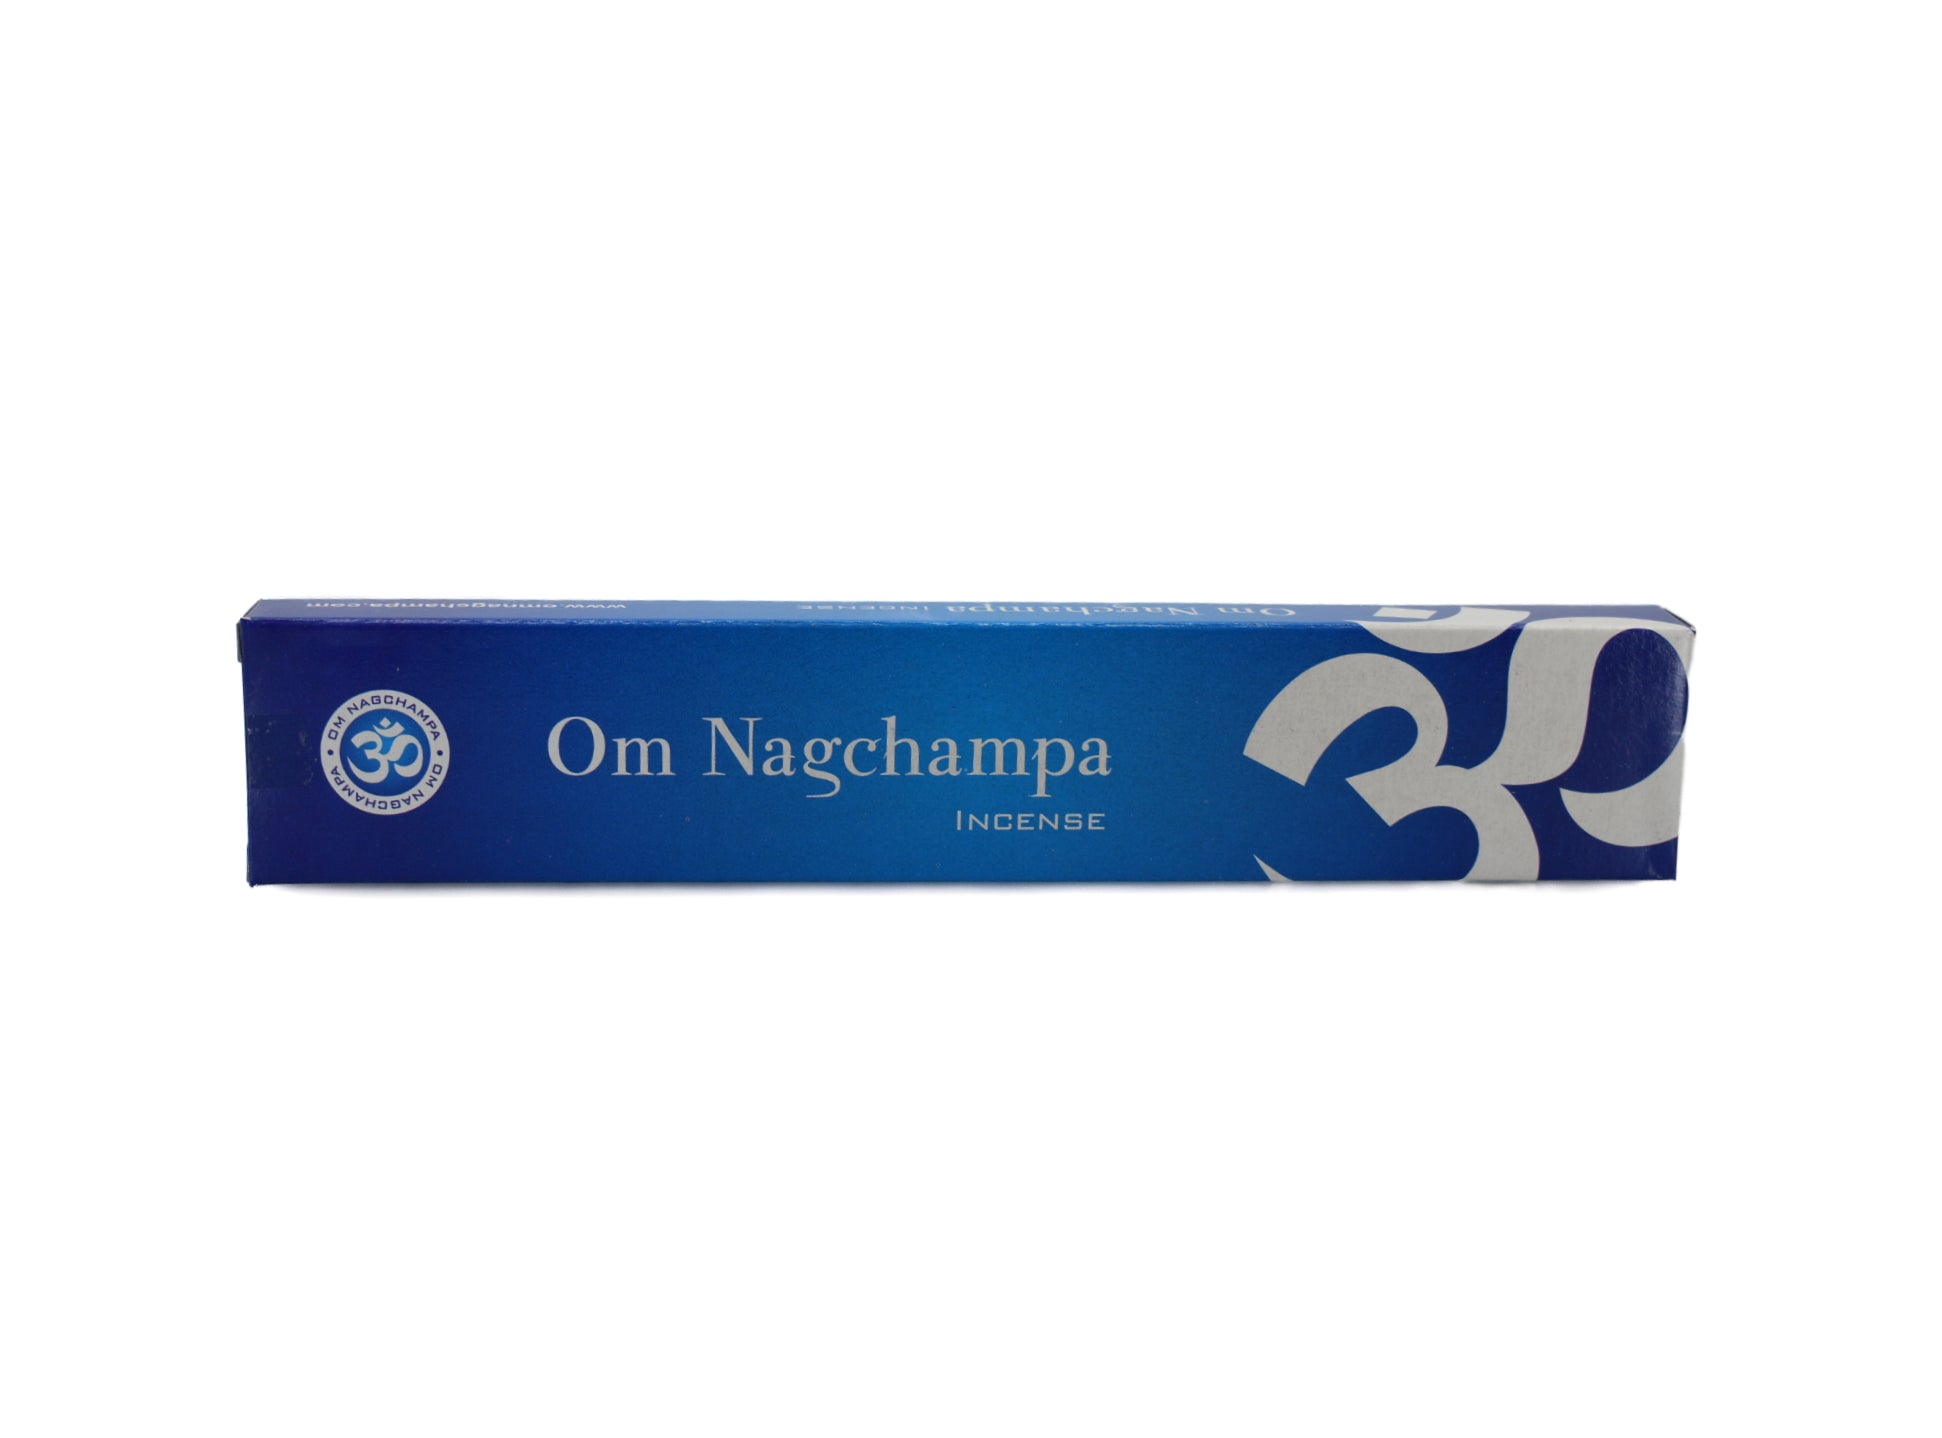 OM Nagchampa Incense Sticks.  The box is darker  blue on the left and right sides and fading to a lighter blue towards the middle of the box.  The right side has the large OM symbol in a diagonal angle.  The left side has a small circle that has the OM symbol in the center and on the outer circle it says OM Nagchampa in small letters.  The center has the title Om Nagchampa incense.  .  